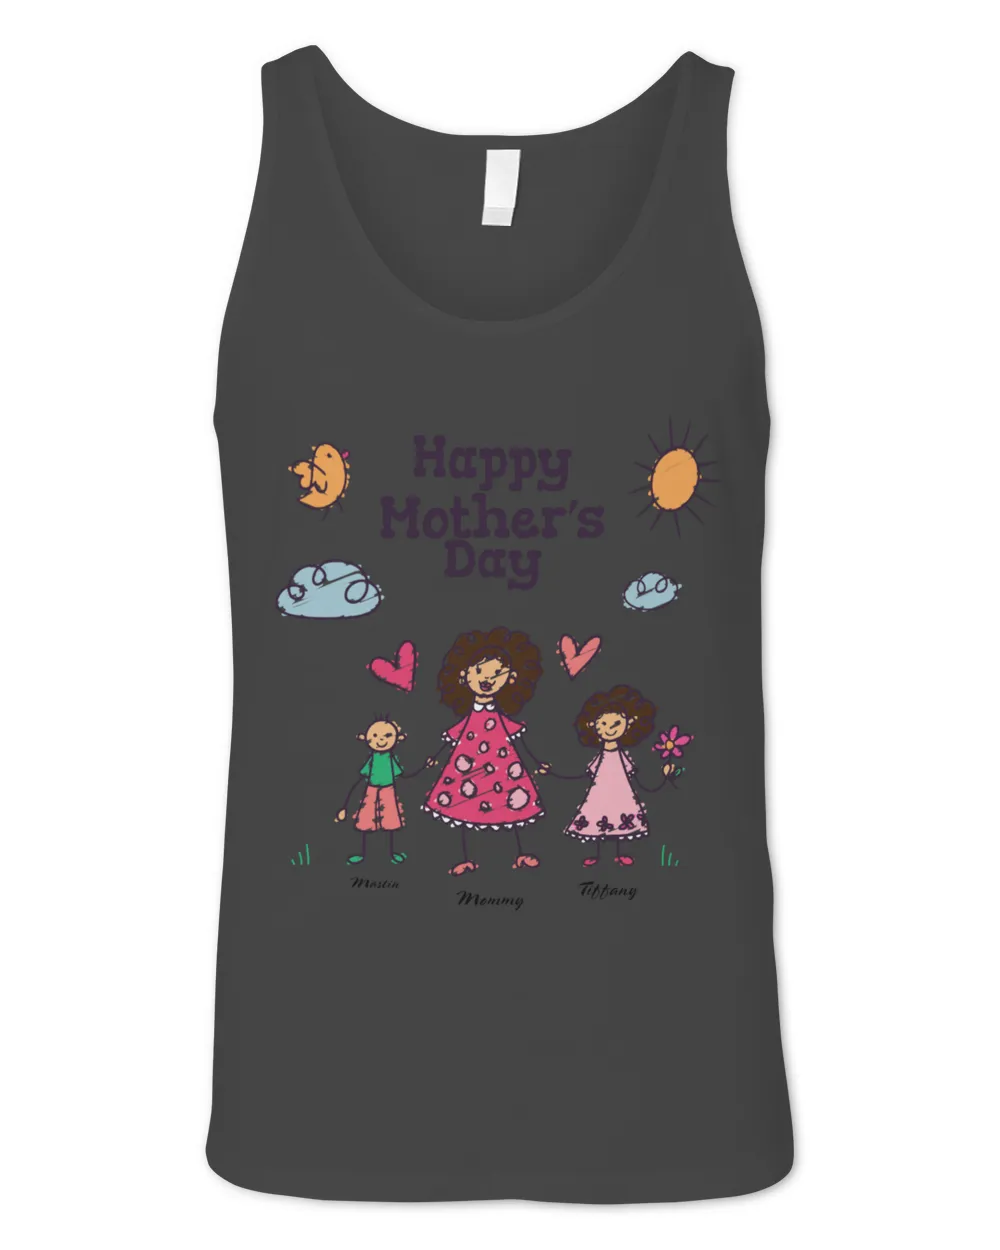 Happy Mother's Day - Mother and Son Daughter Customize